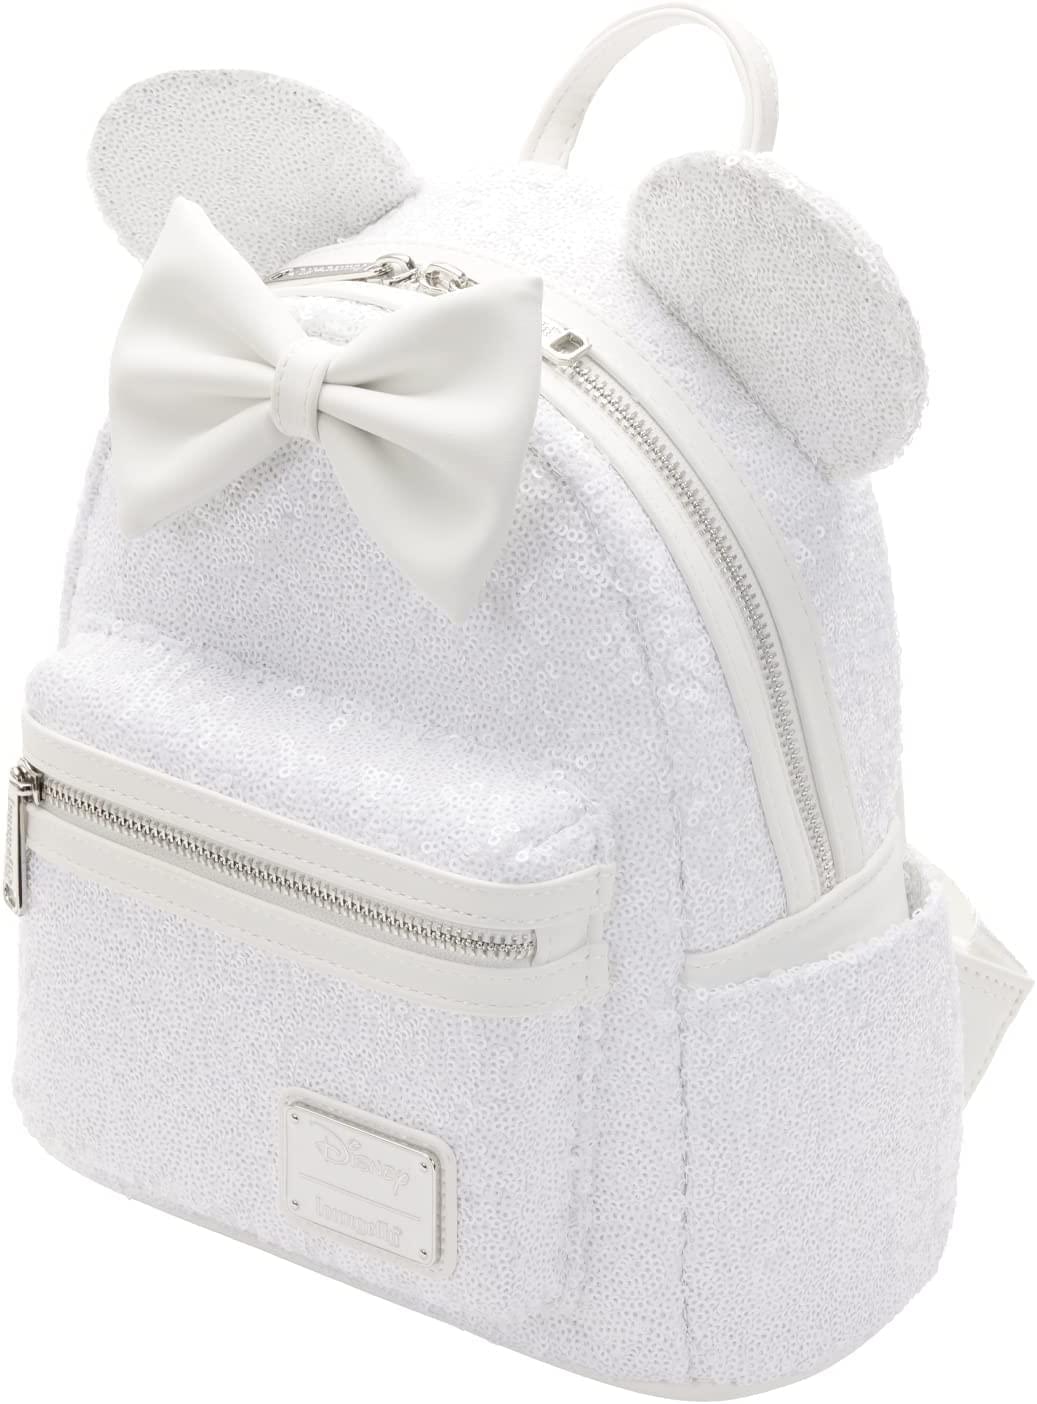 Disney Minnie Mouse Sequin Wedding Mini Backpack